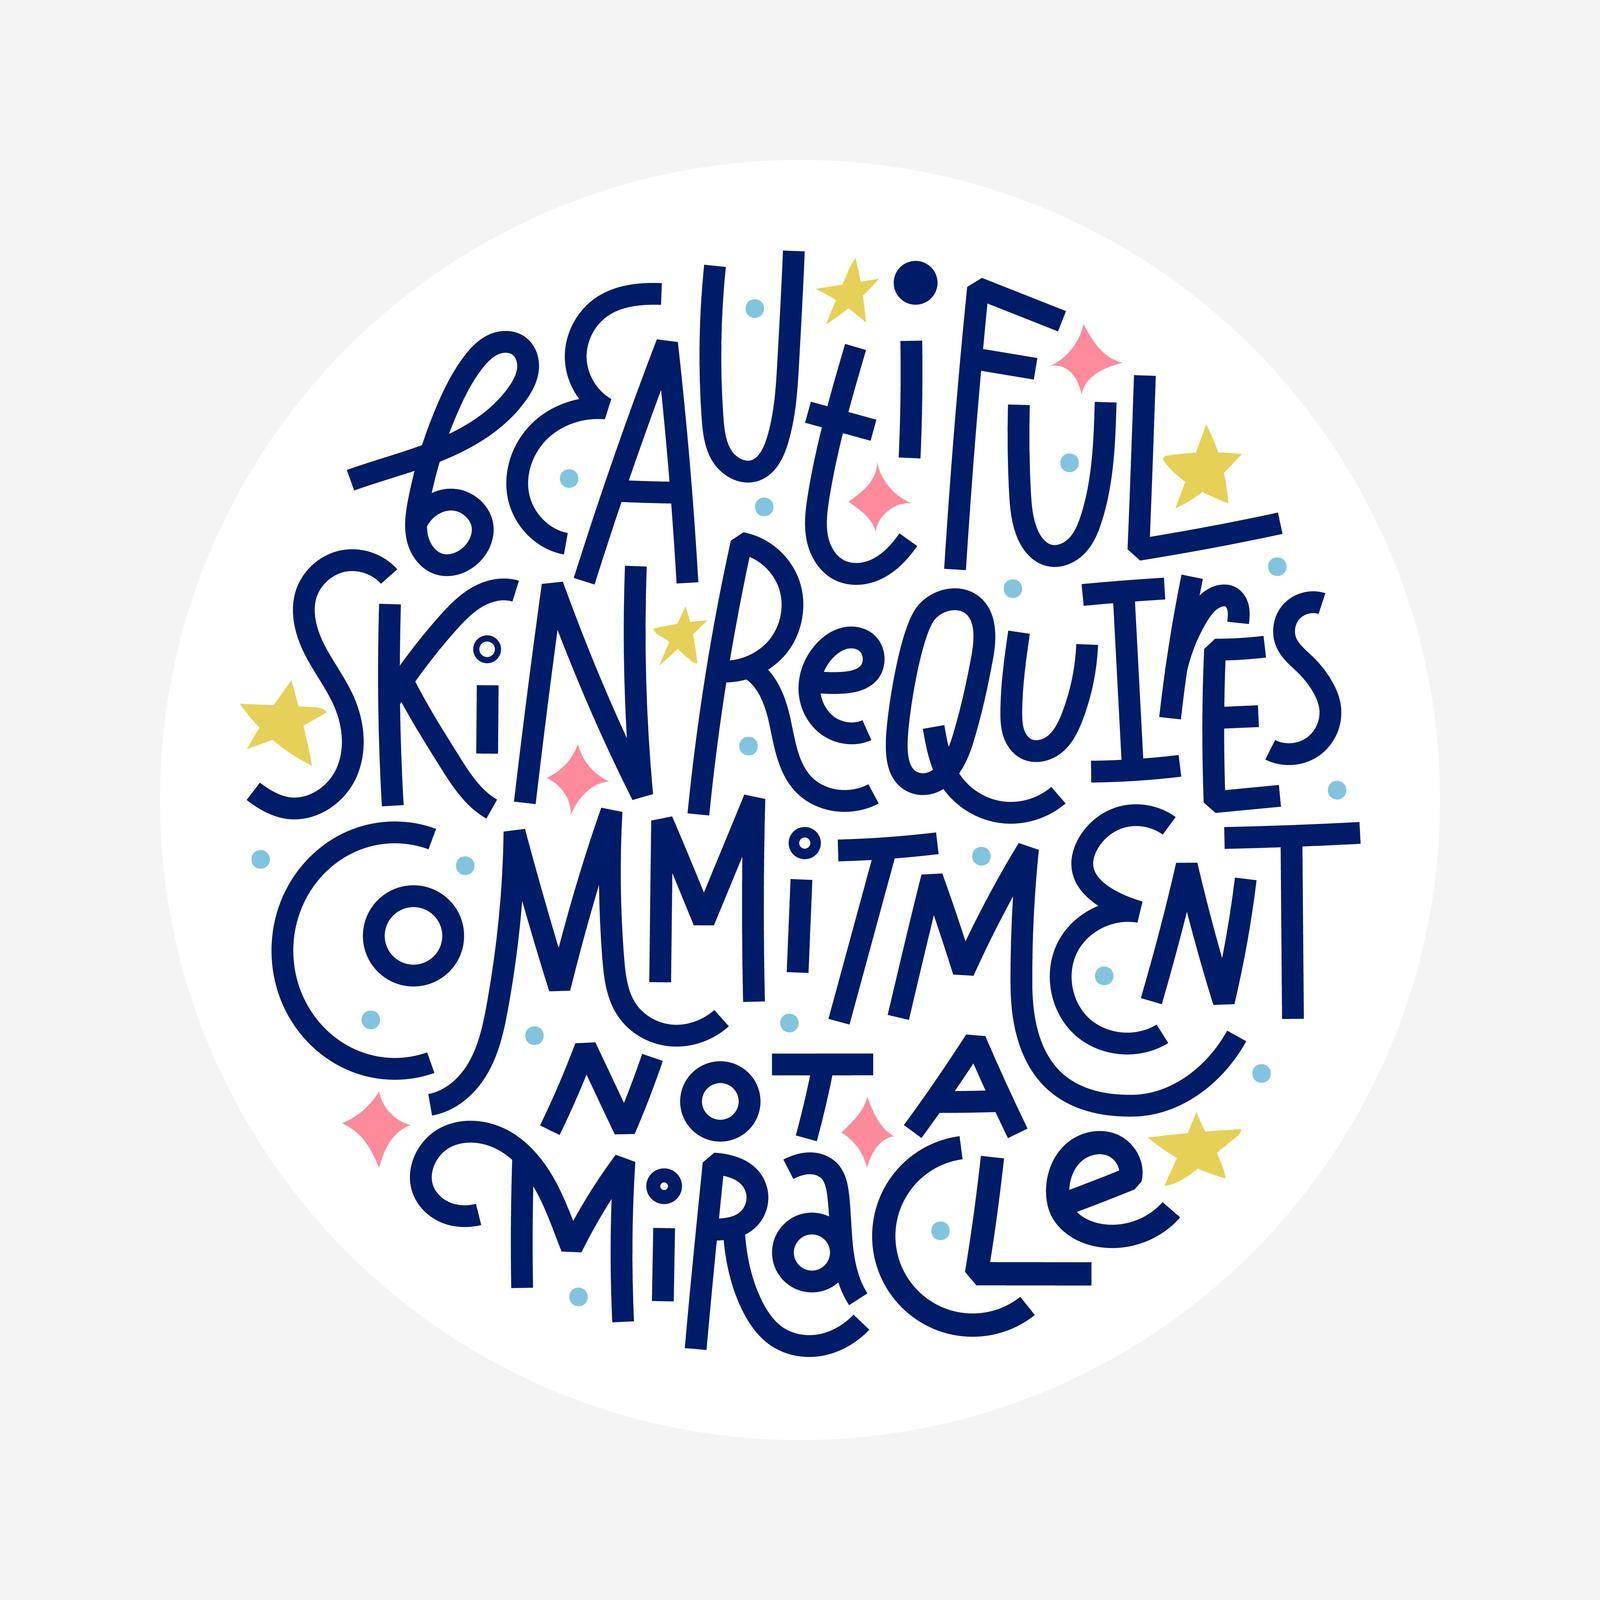 Beauty and skincare lettering quote. Beautiful skin requires commitment, not a miracle. Round shape with white background for labels or stickers.